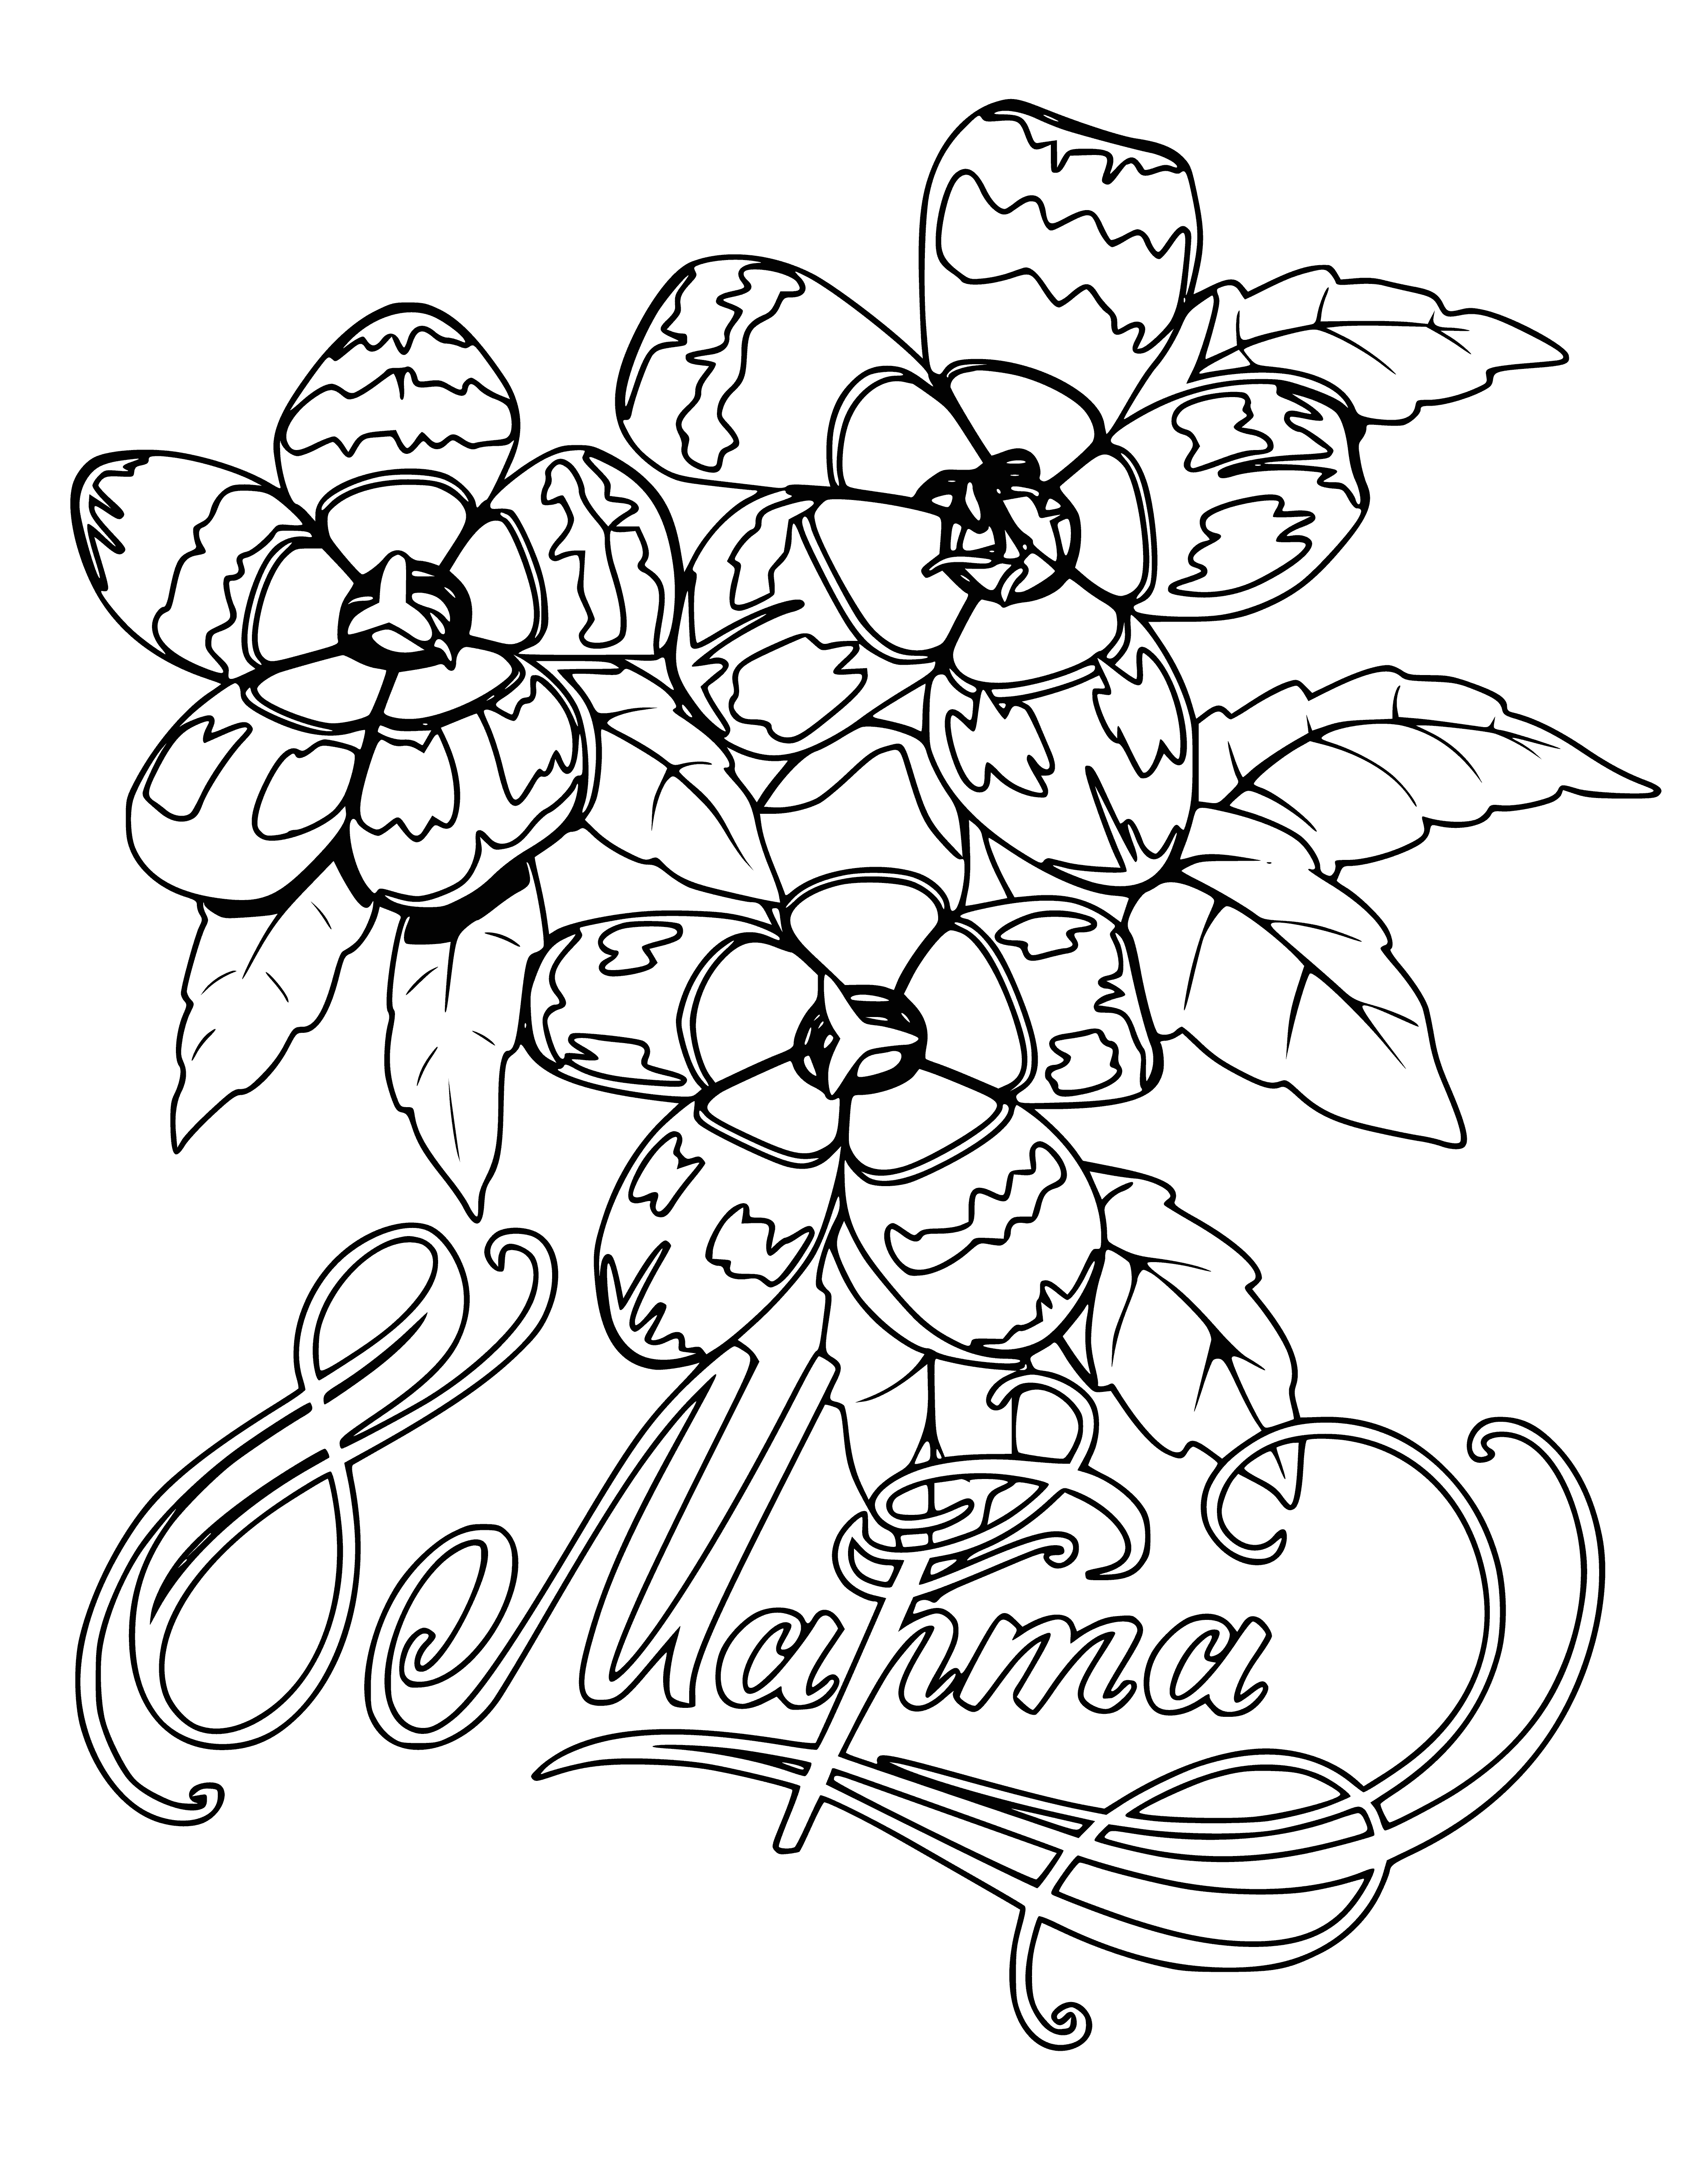 coloring page: A coloring page of a bouquet of five red, one yellow, and one white flowers in a glass green vase.